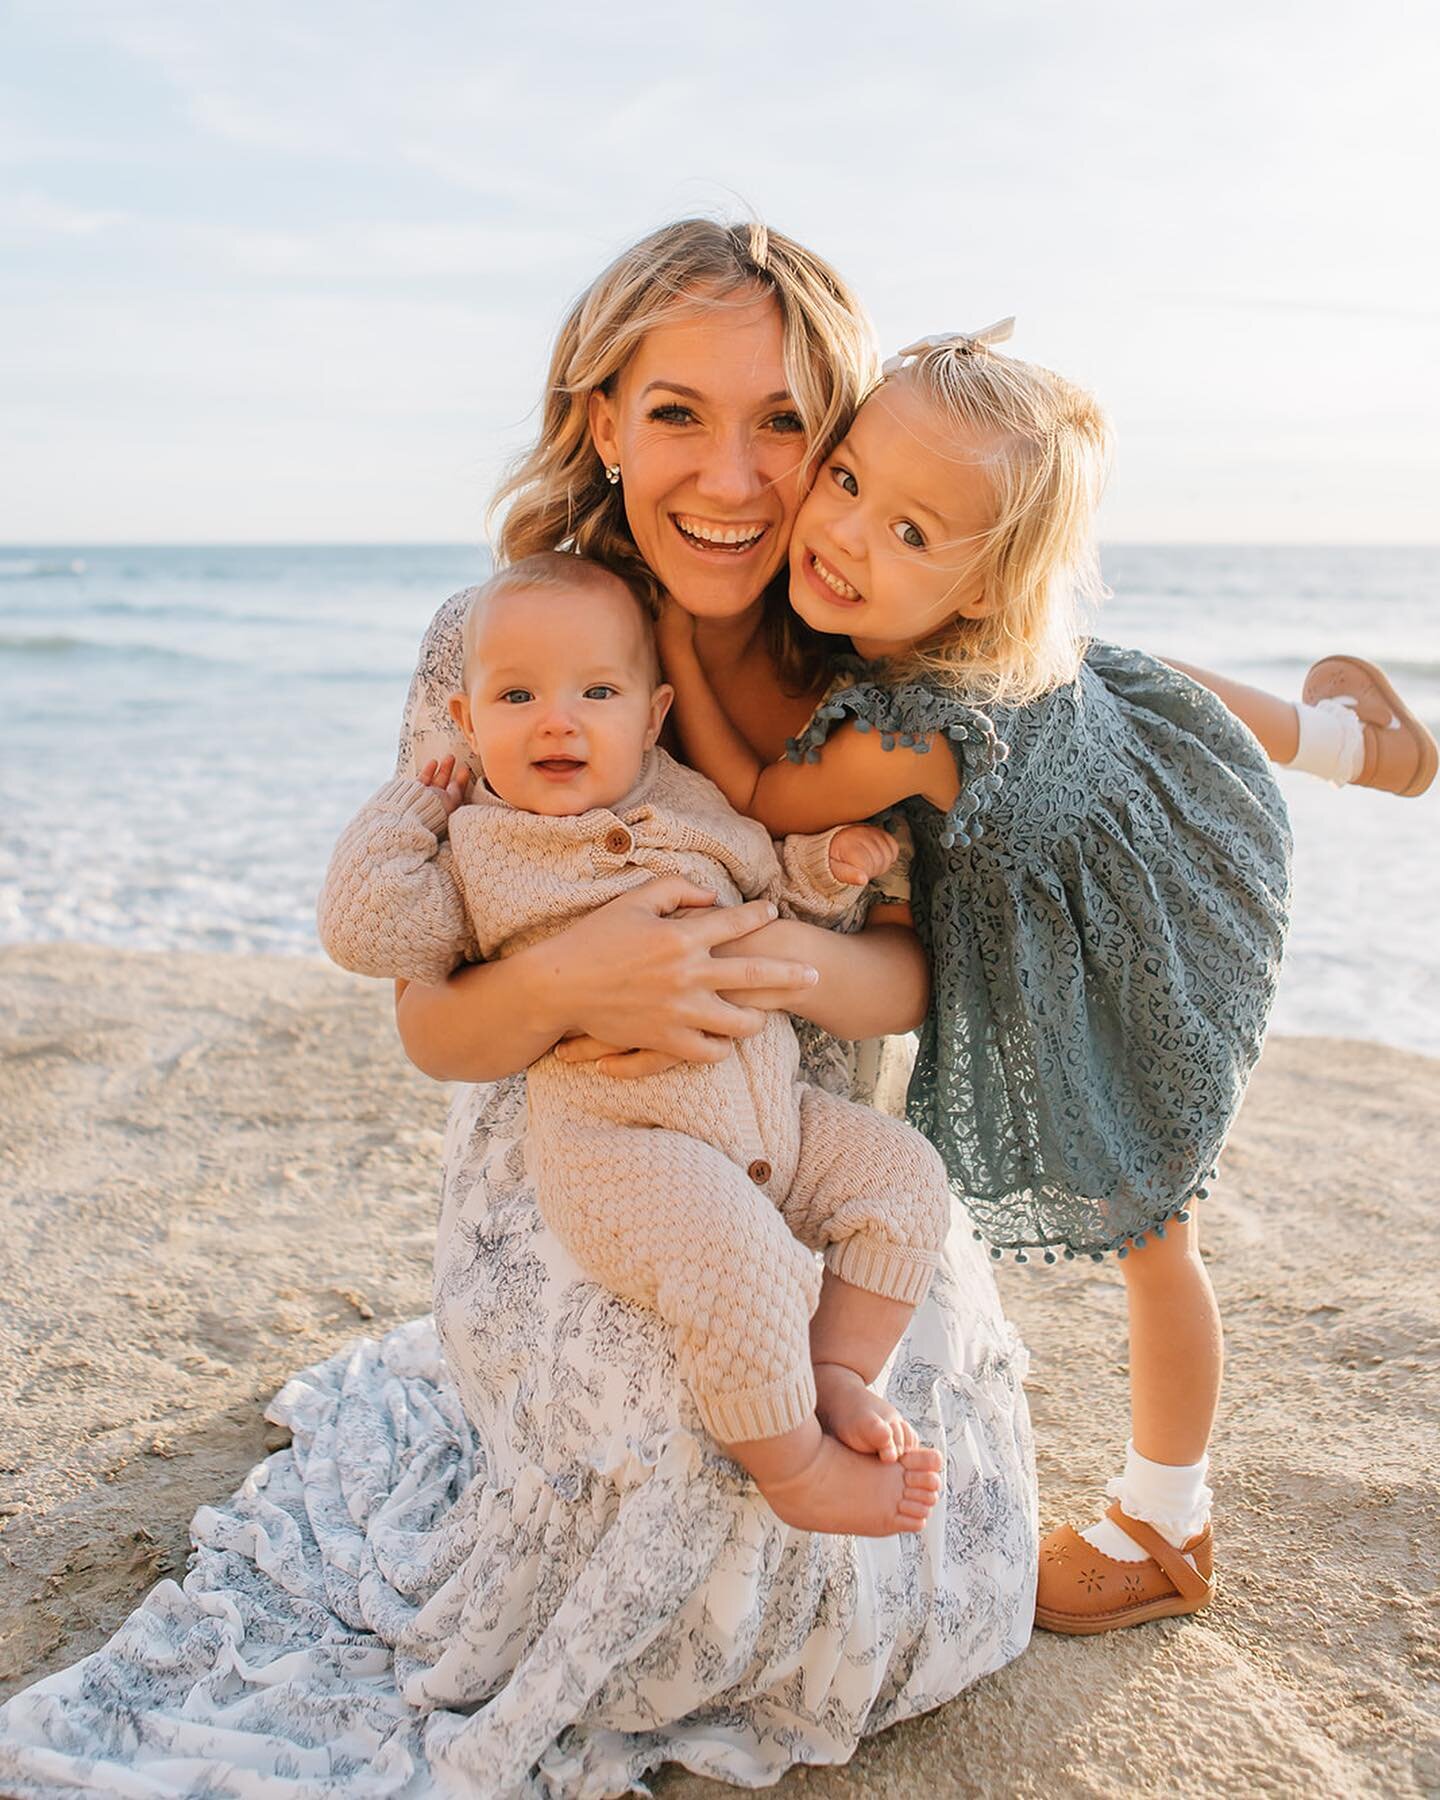 I&rsquo;ve said it 100 times already, but moms and their babies are my absolute FAVORITE thing to photograph. It&rsquo;s the most special bond and connection and I can never get enough! Happy Mothers Day! 💐 Moms make this world go round